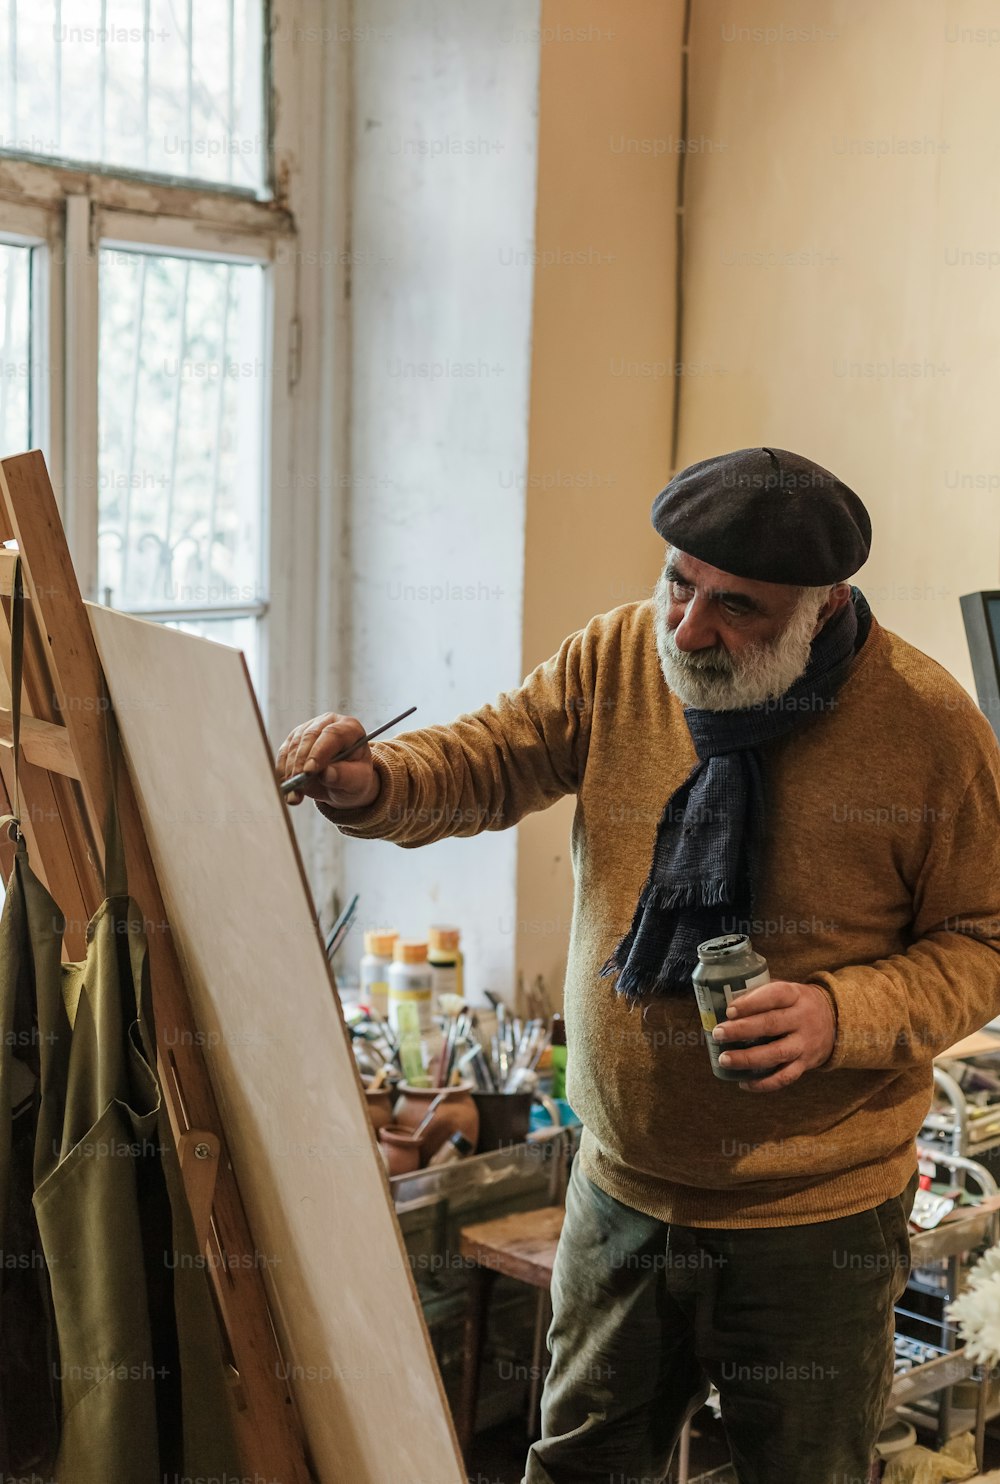 a man with a beard is painting on a easel